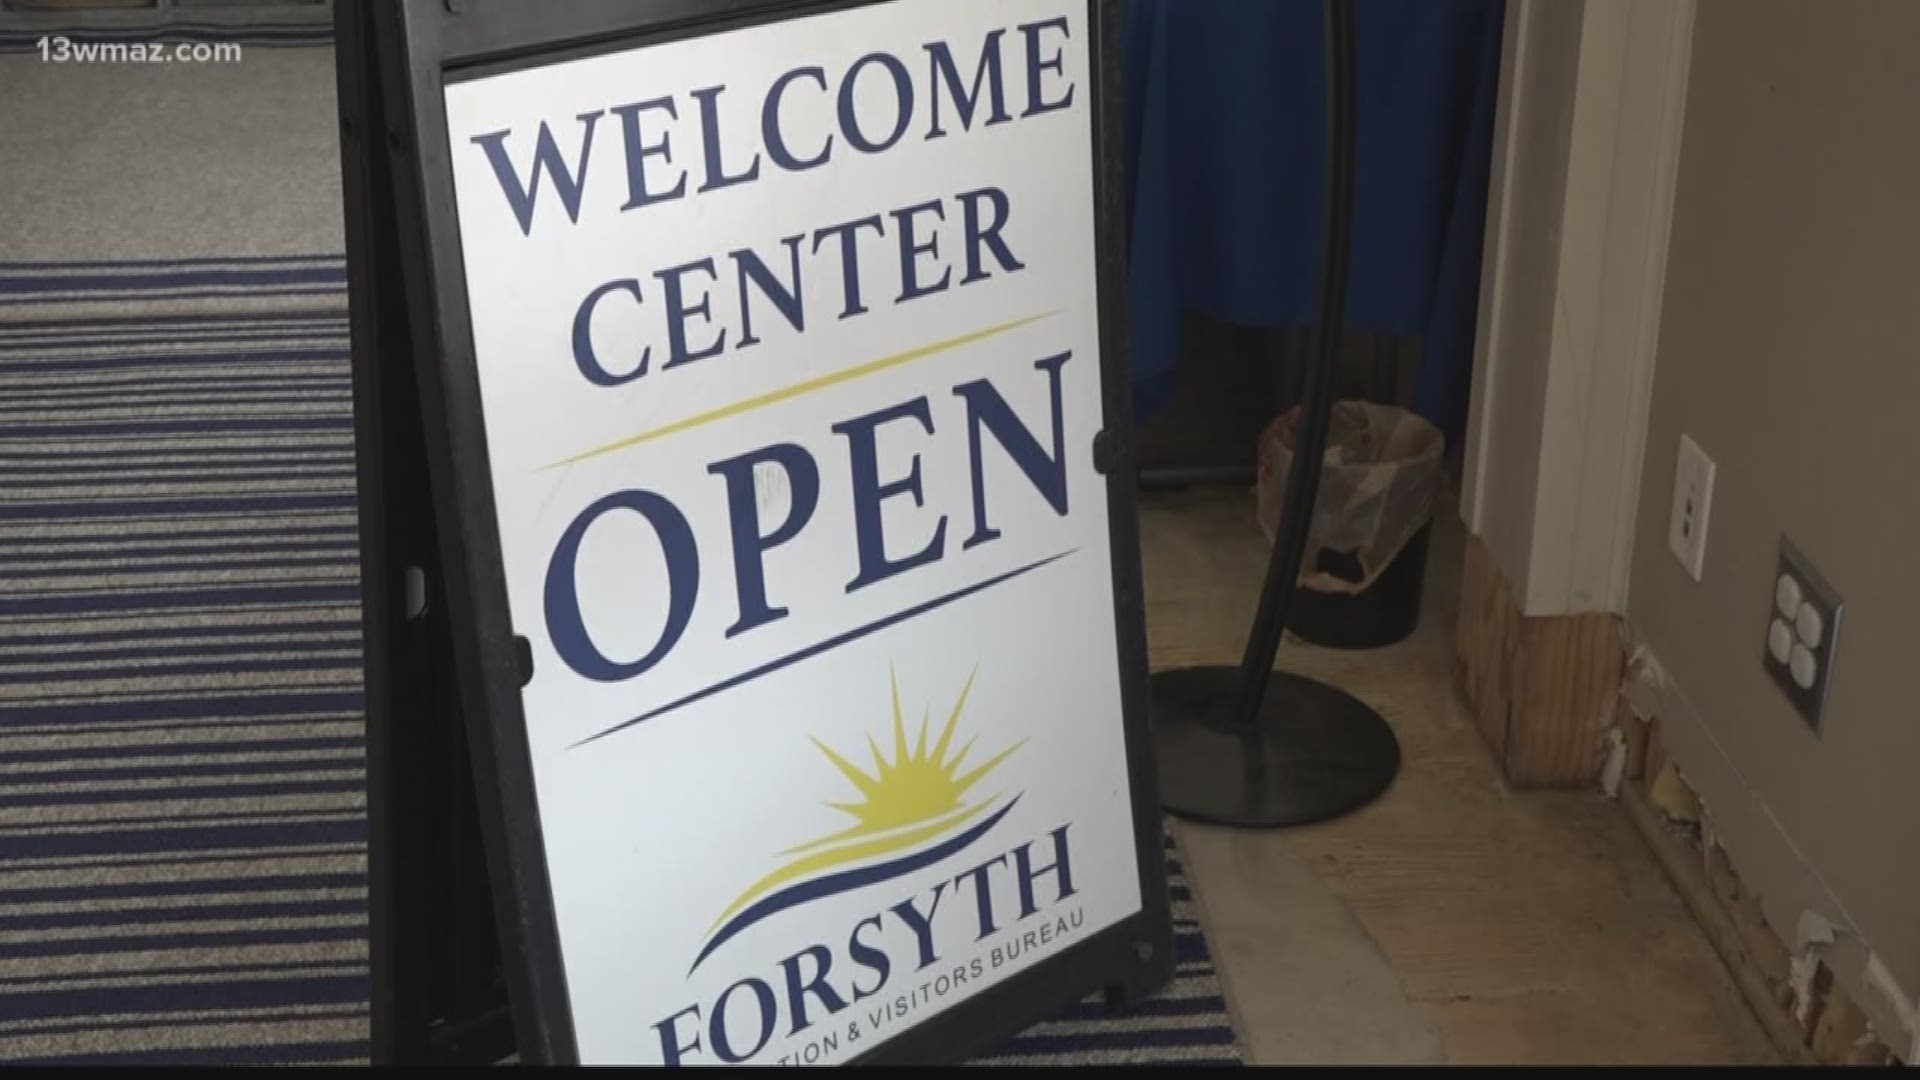 People in Forsyth are hoping to bring more visitors to town. To do this, the visitors center, the city, and local businesses are working together to come up with solutions.